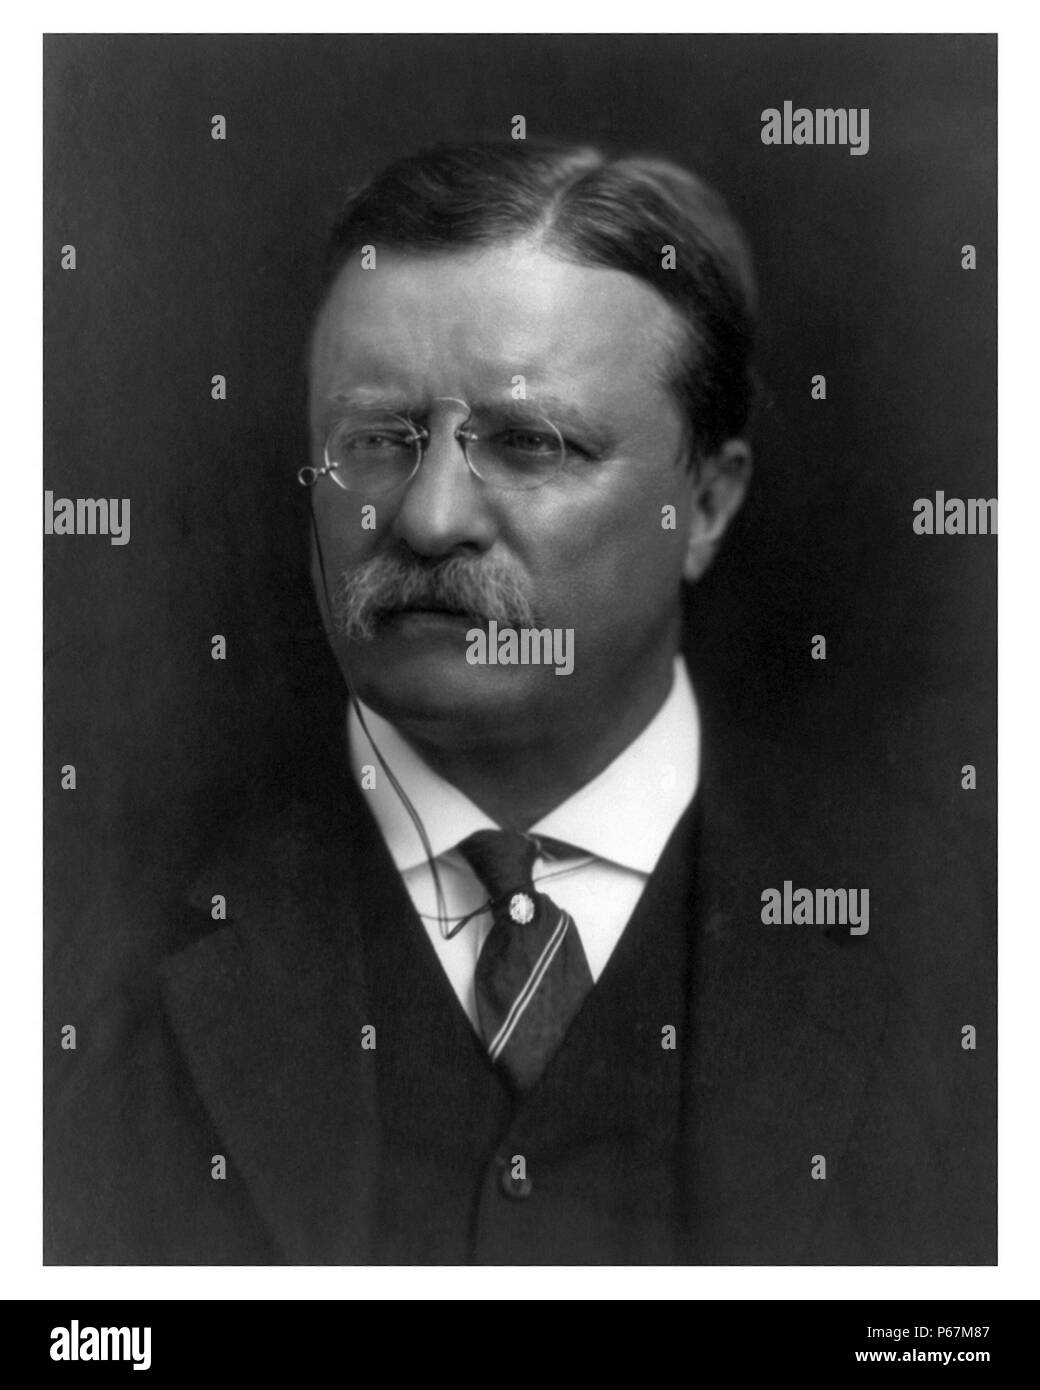 Theodore Roosevelt (1858 – 1919) was an American politician, author, naturalist, explorer, and historian who served as the 26th President of the United States. Stock Photo